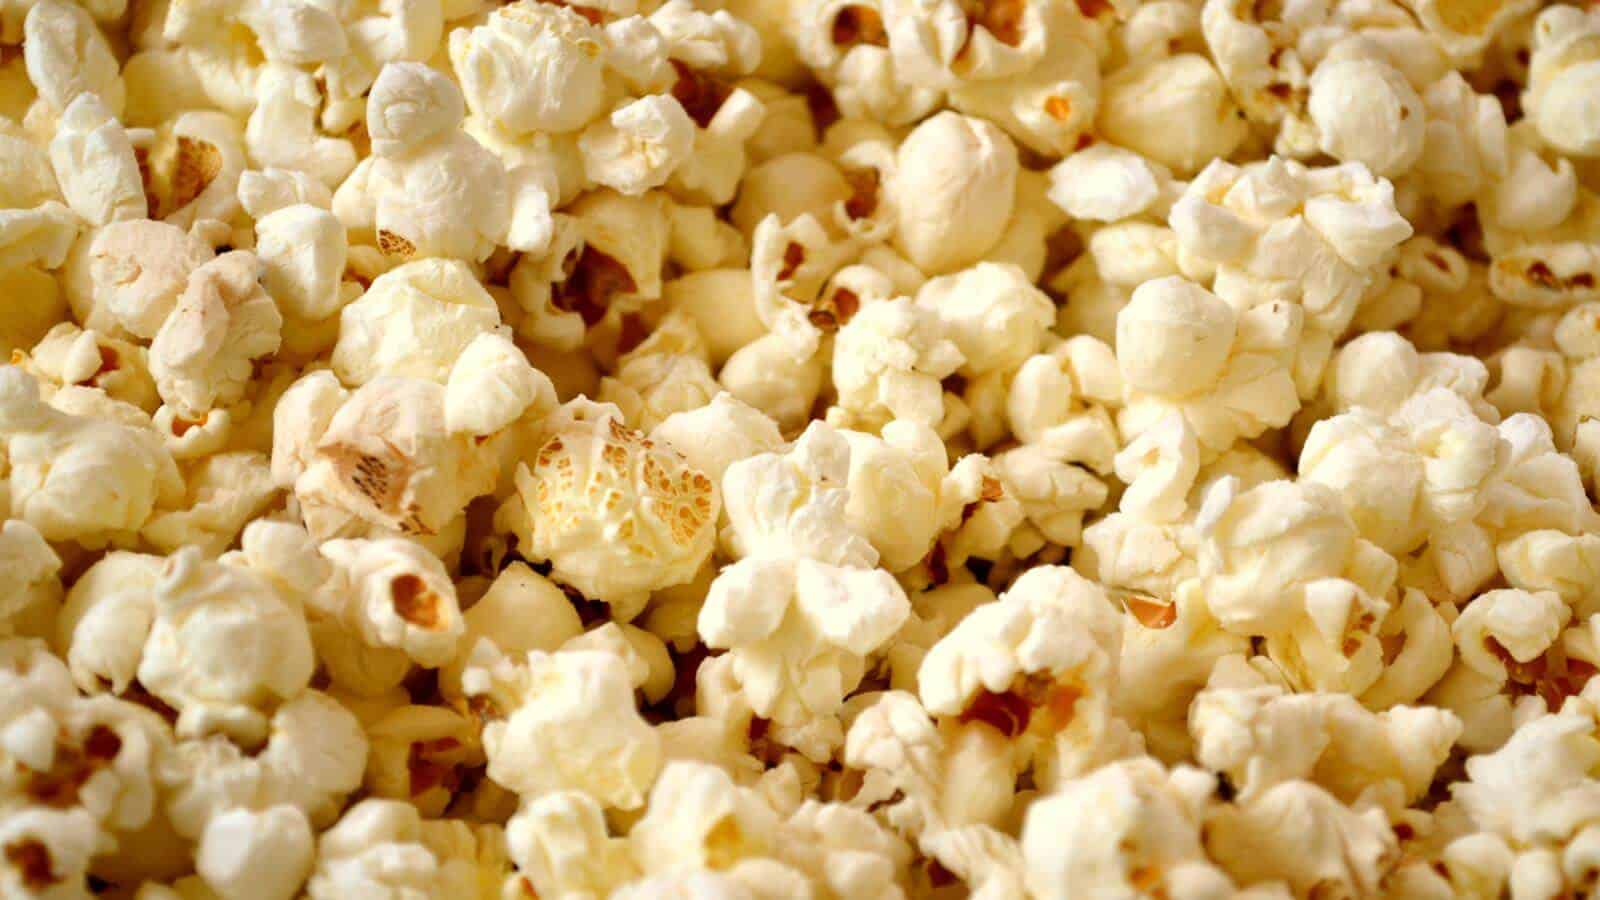 A close up view of popped popcorn.